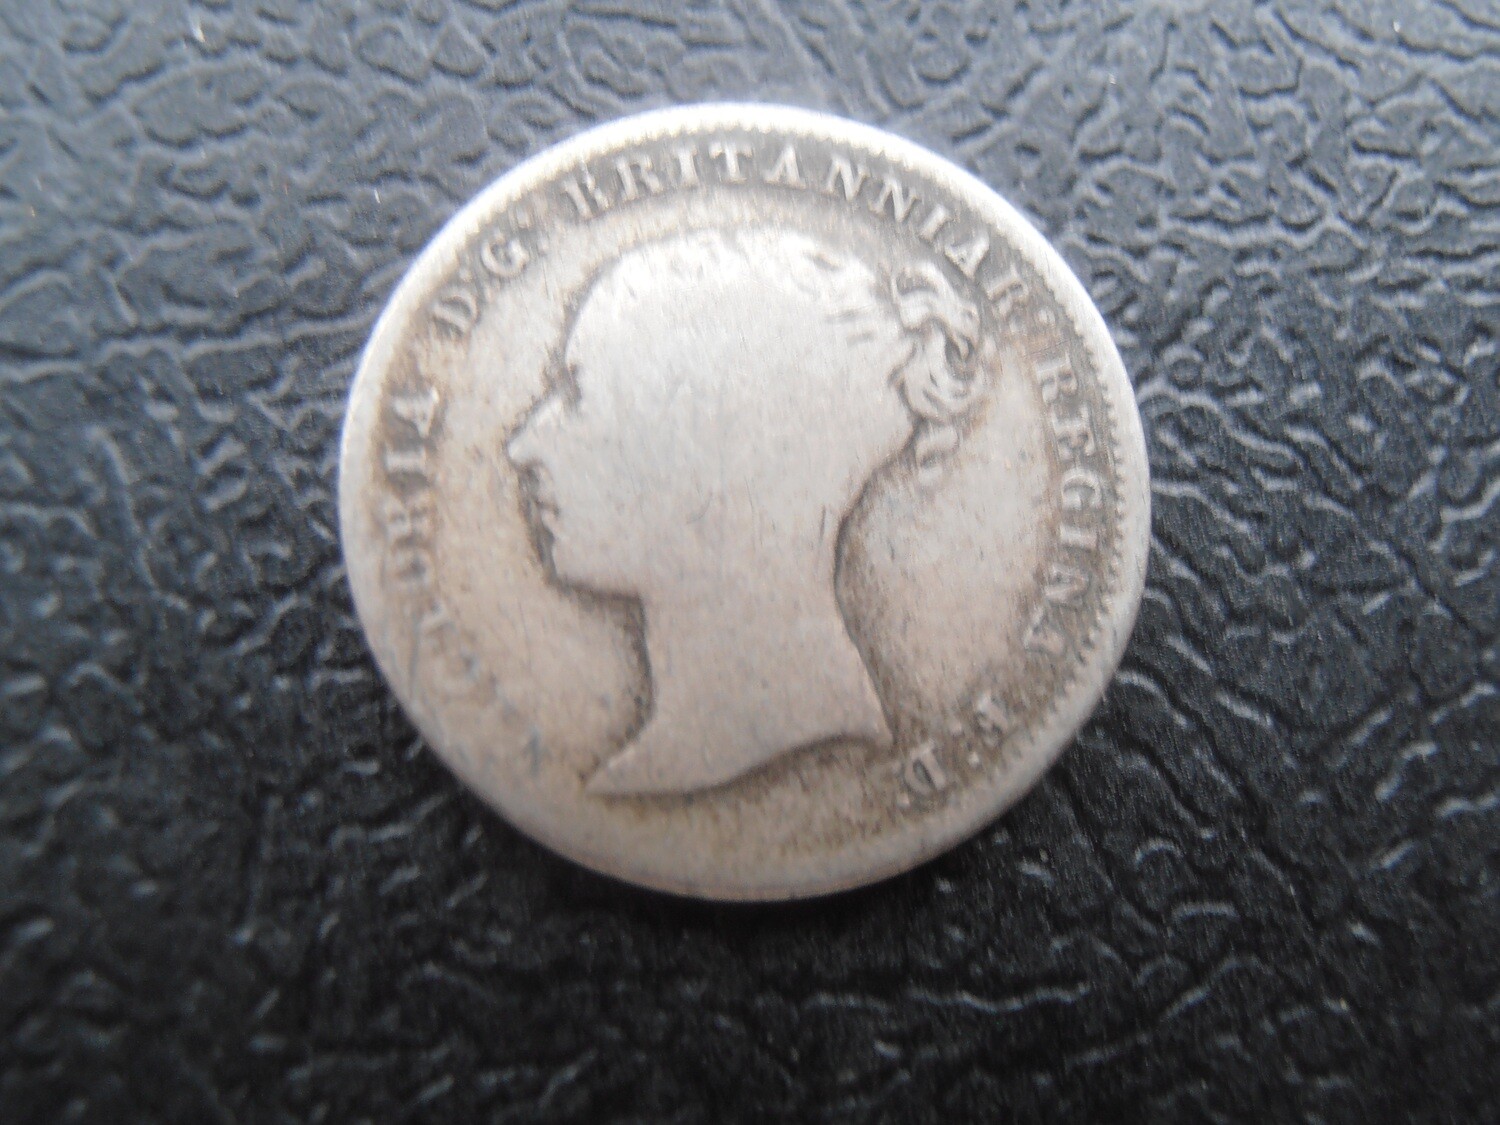 1854 - Fourpence